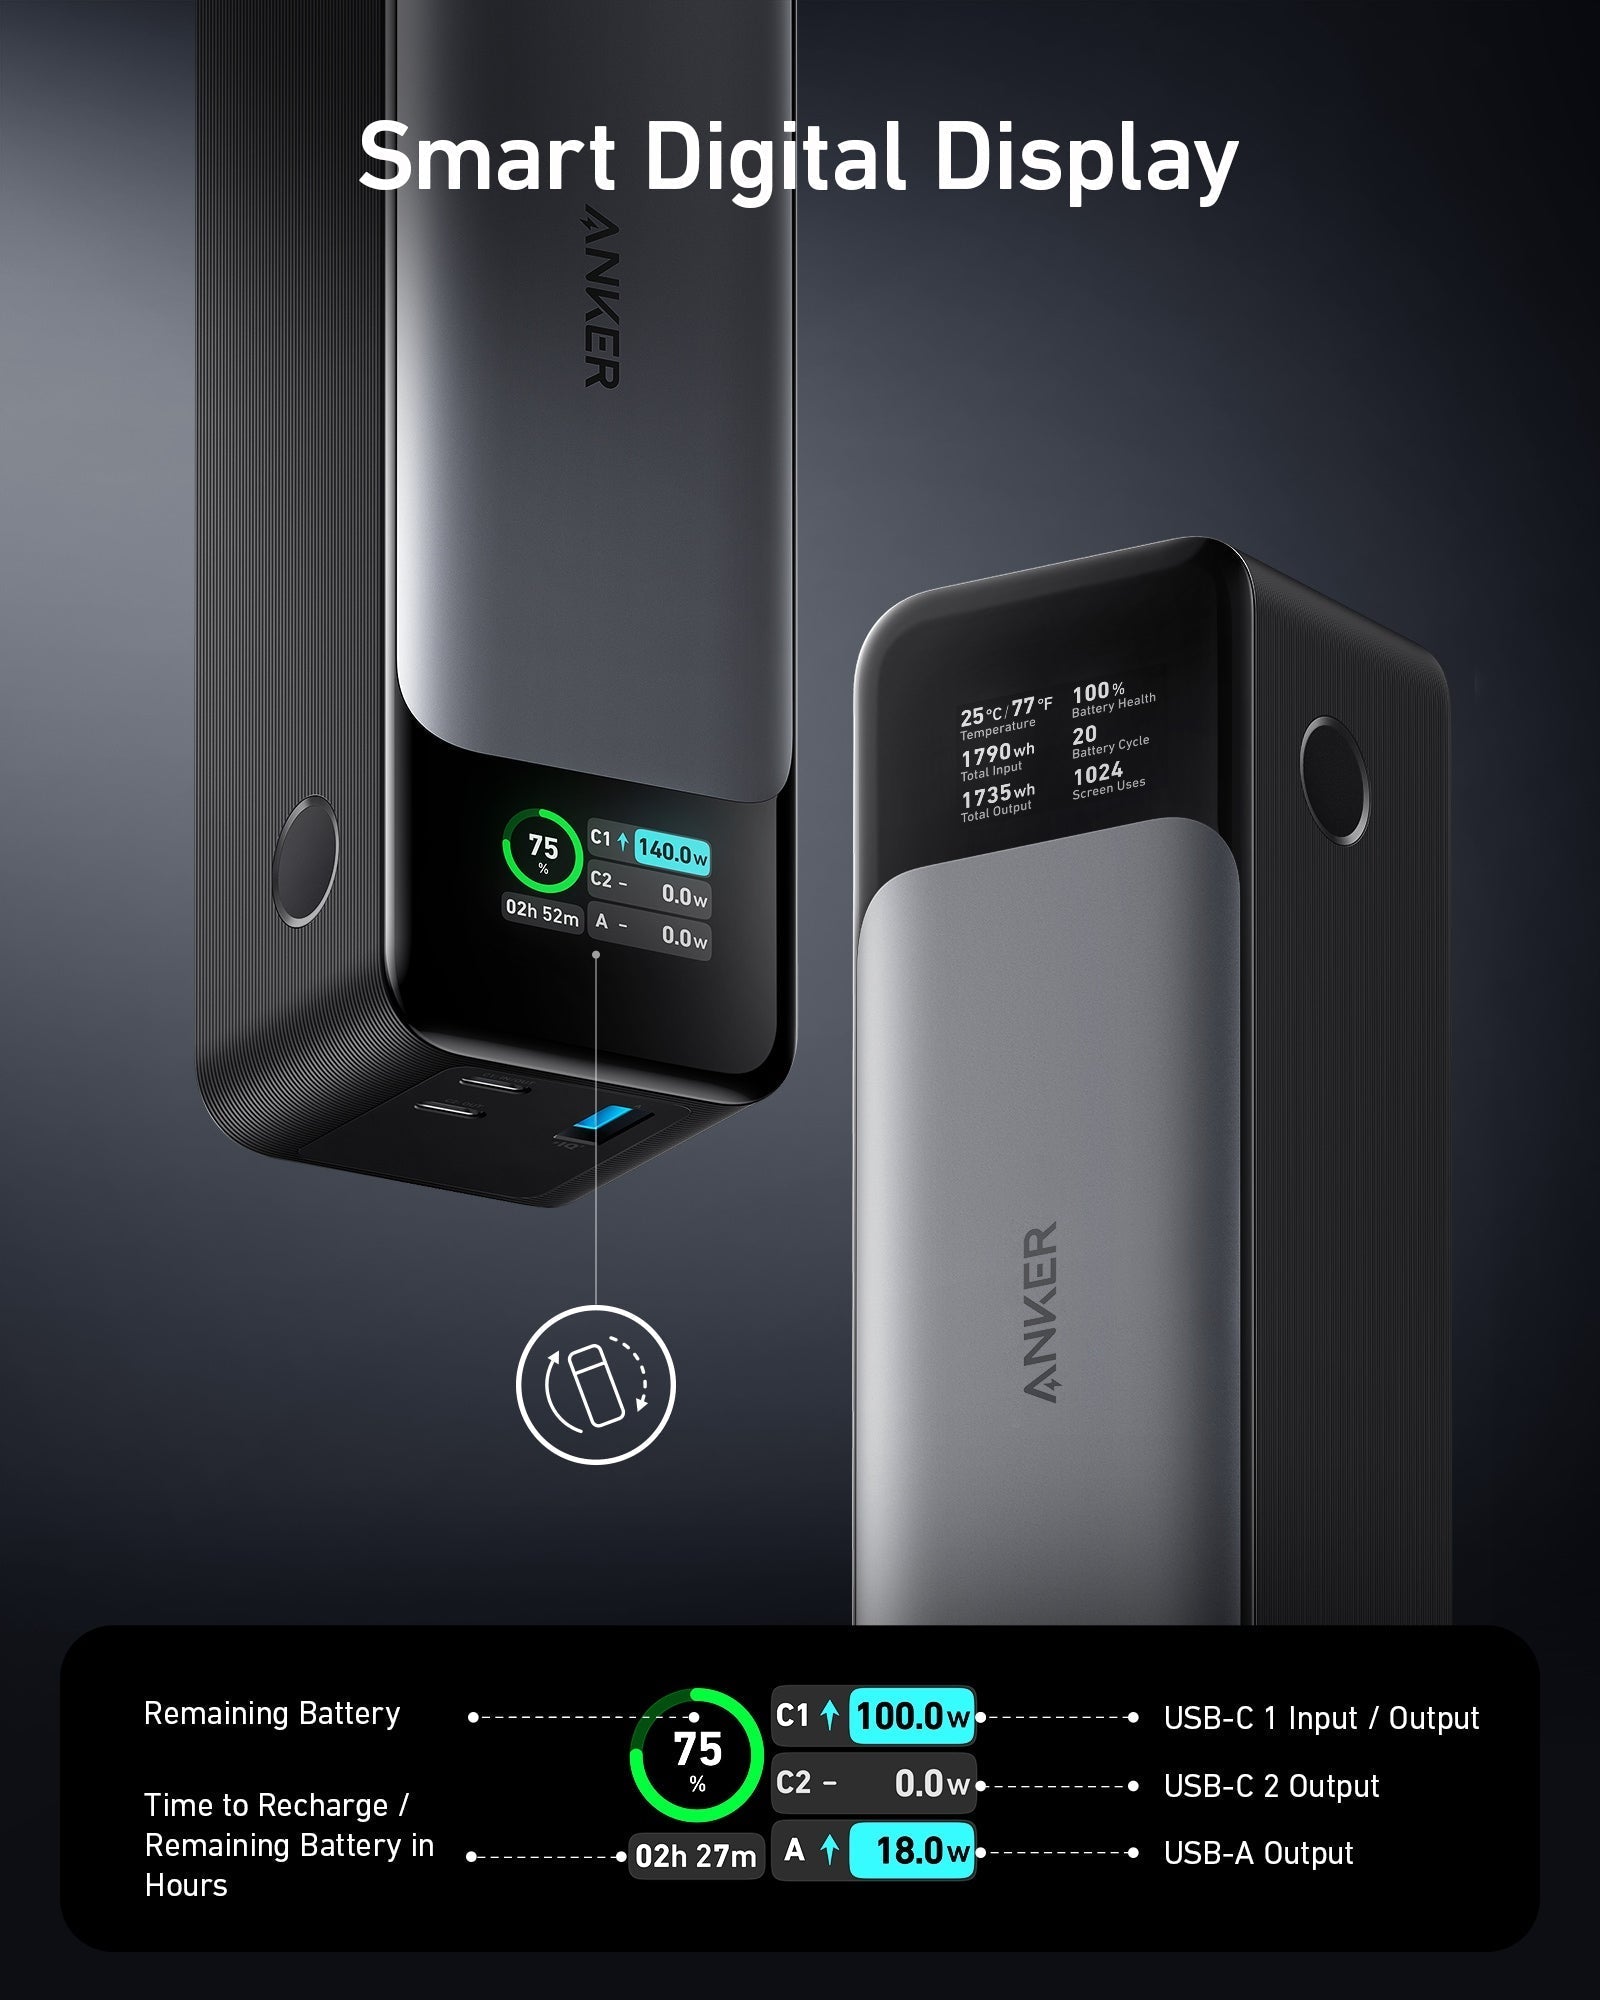 Best Steam Deck Power Bank from Anker in 2023 - Anker AU